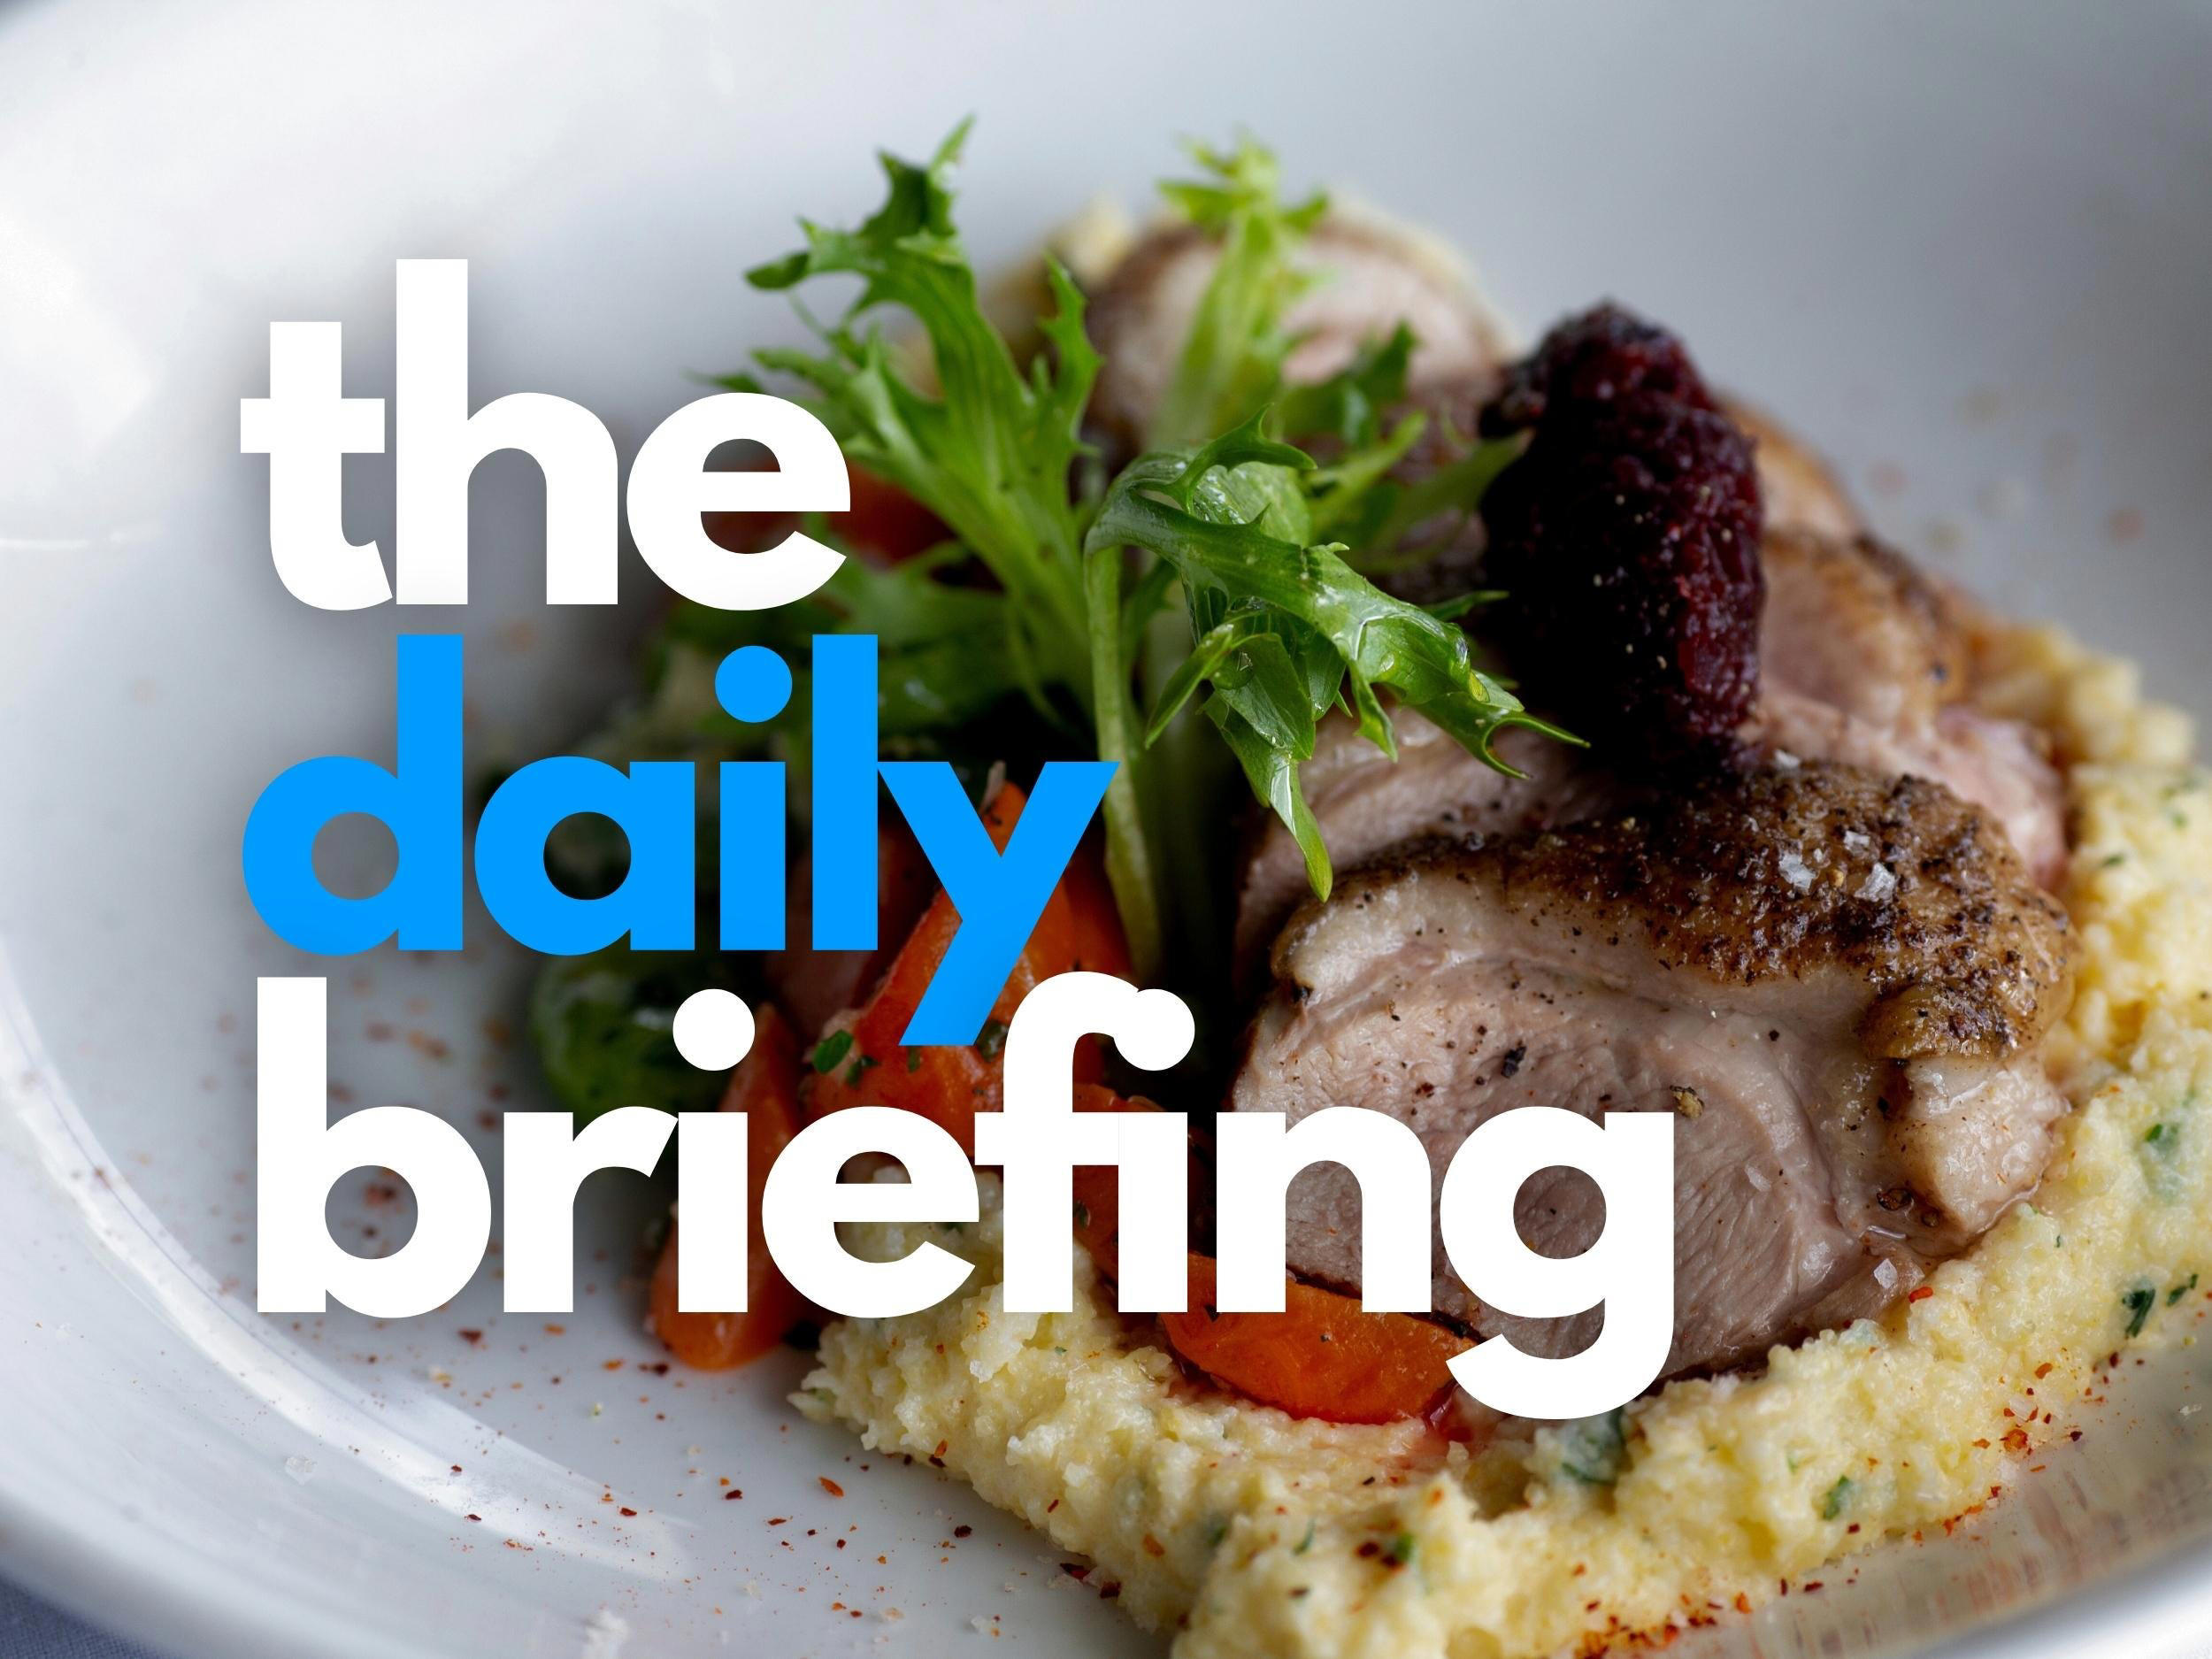 Our food writer's recommendations, mural tour, today's top stories ...